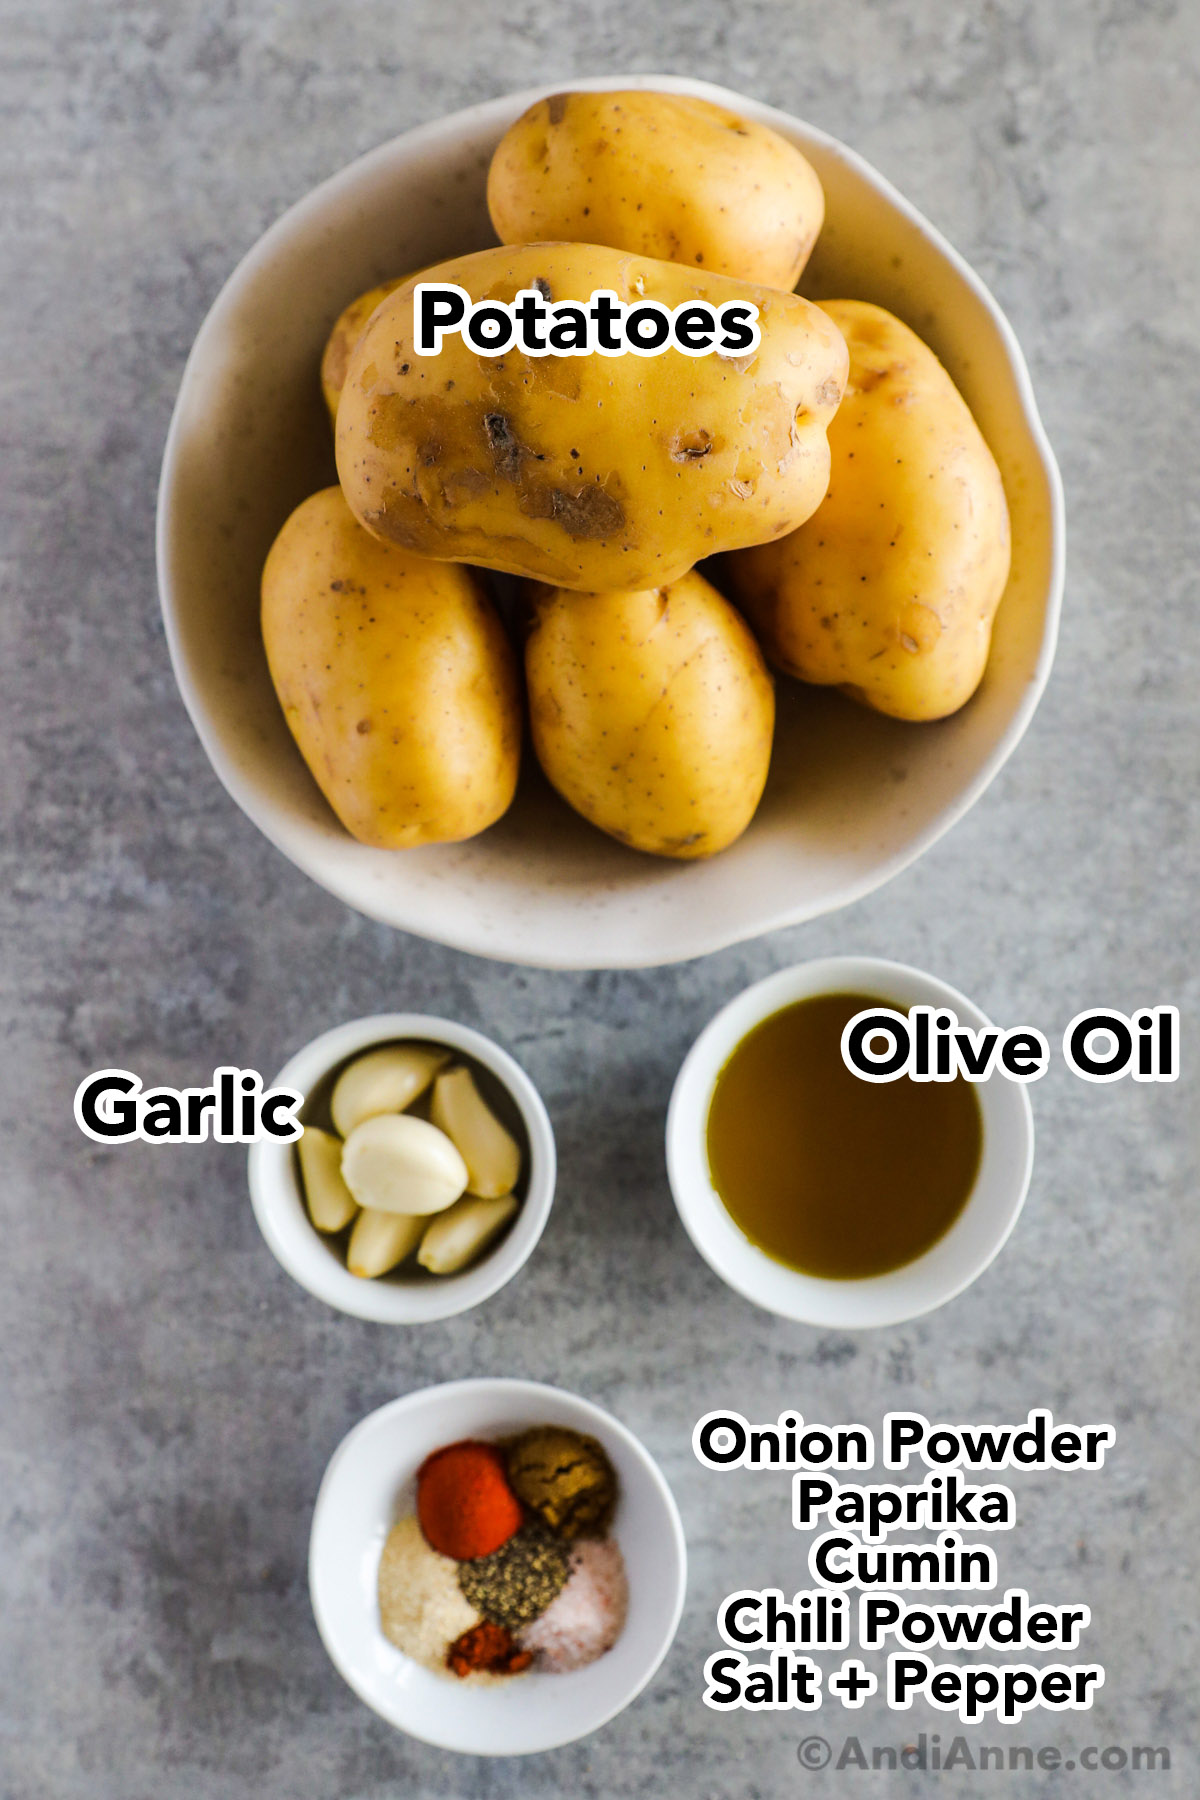 Bowls of potatoes, garlic, olive oil and spices.